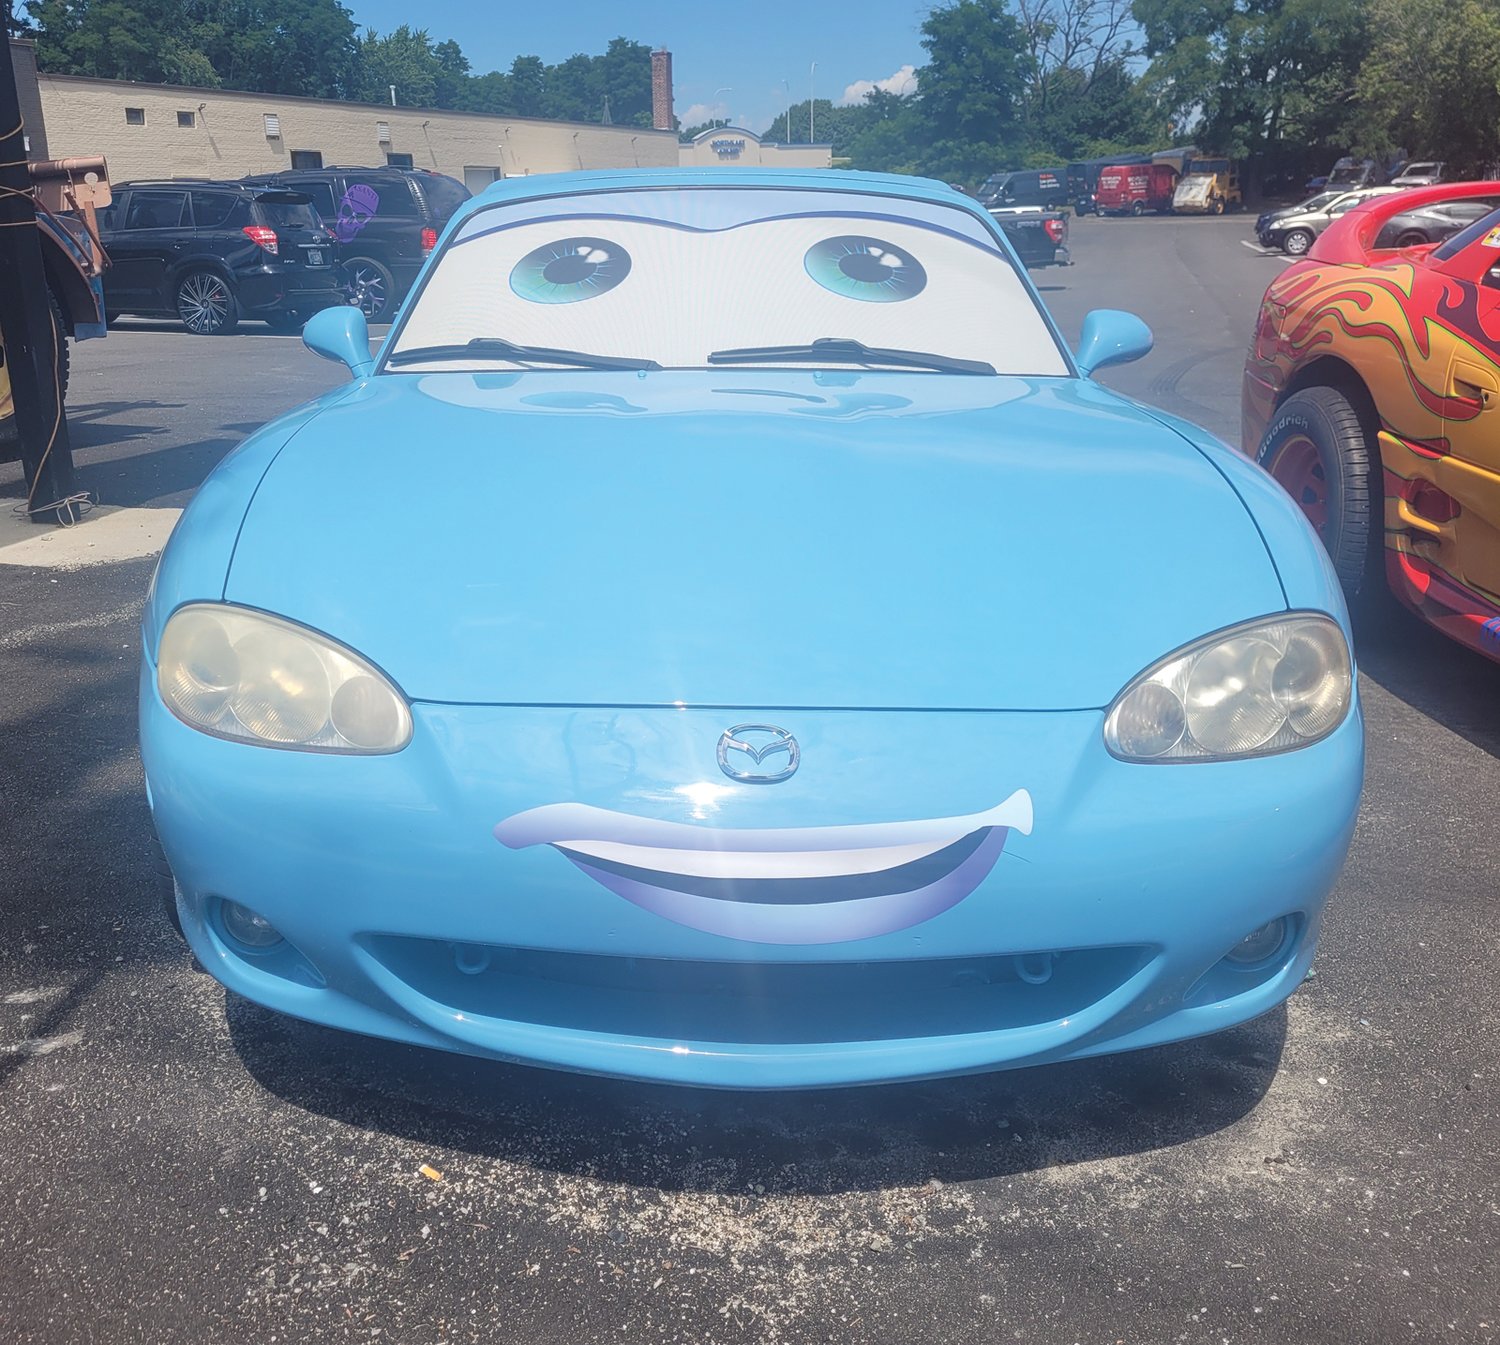 SALLY’S NOT A MUSTANG: Sally Carrera, a major character from the Disney/Pixar Cars franchise, works as an attorney in Radiator Springs. She’s Lightning McQueen’s girlfriend.